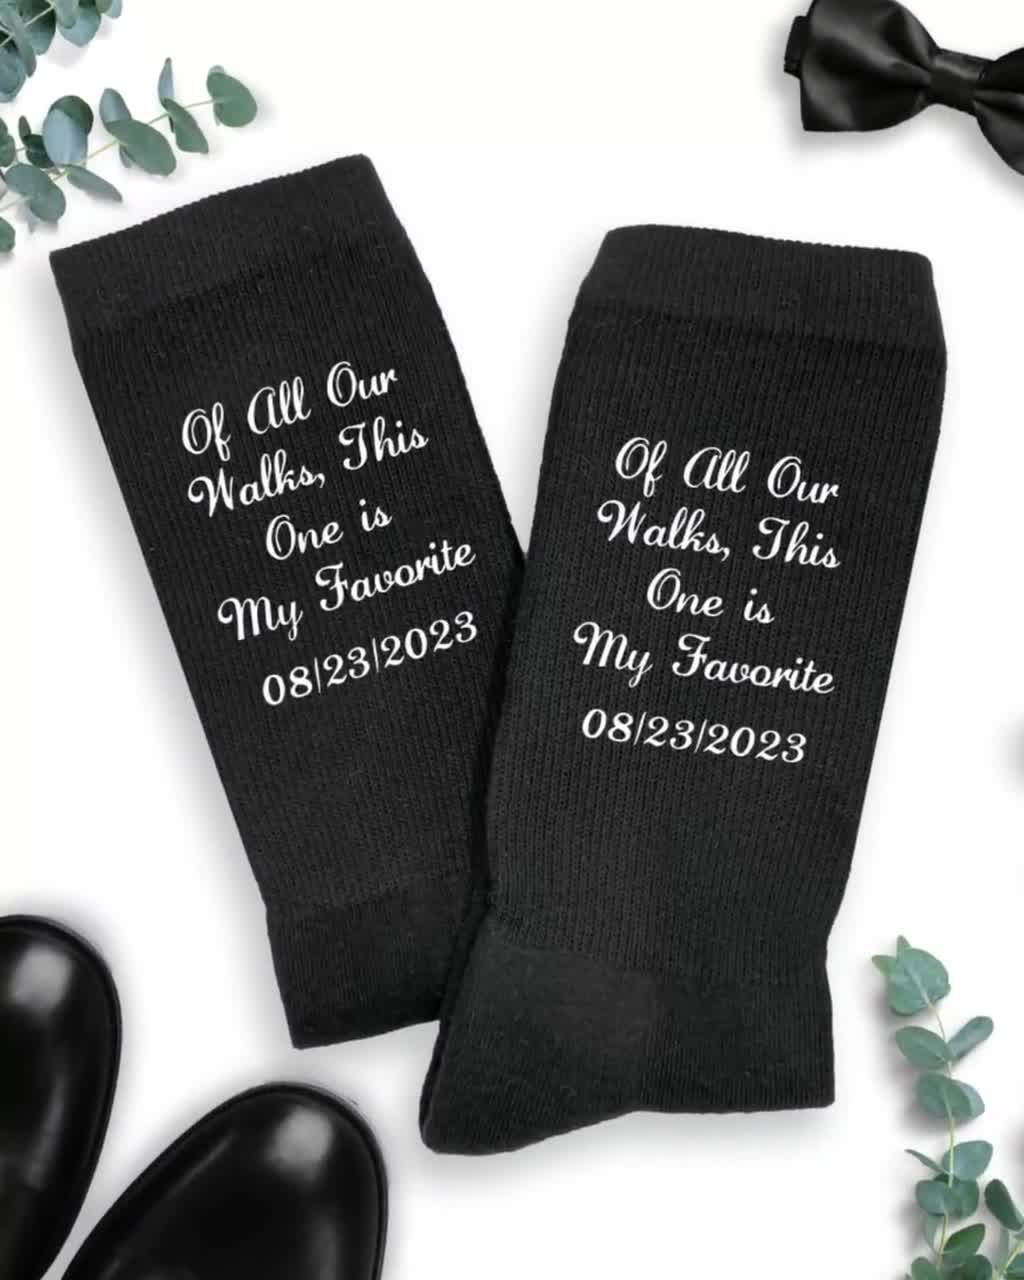 personalized socks Kleding Gender-neutrale kleding volwassenen Sokken & Beenmode brides father gift Father of the Bride Gift of all our walks this is my fav father special socks for a special walk 